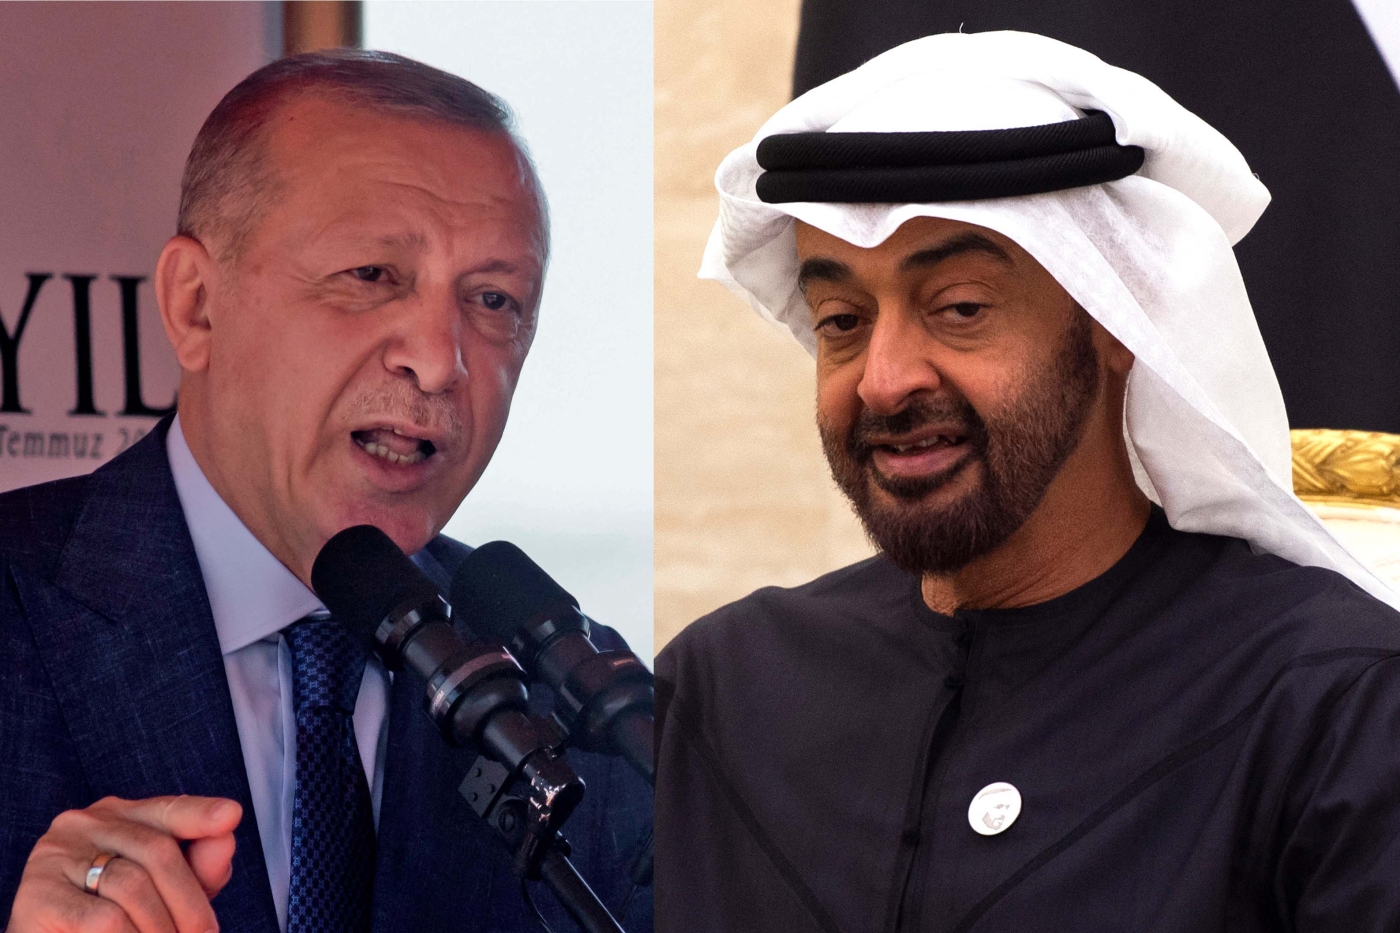 Turkish President Recep Tayyip Erdogan and Abu Dhabi Crown Prince Mohammed bin Zayed also discussed their views on a number of regional and international issues